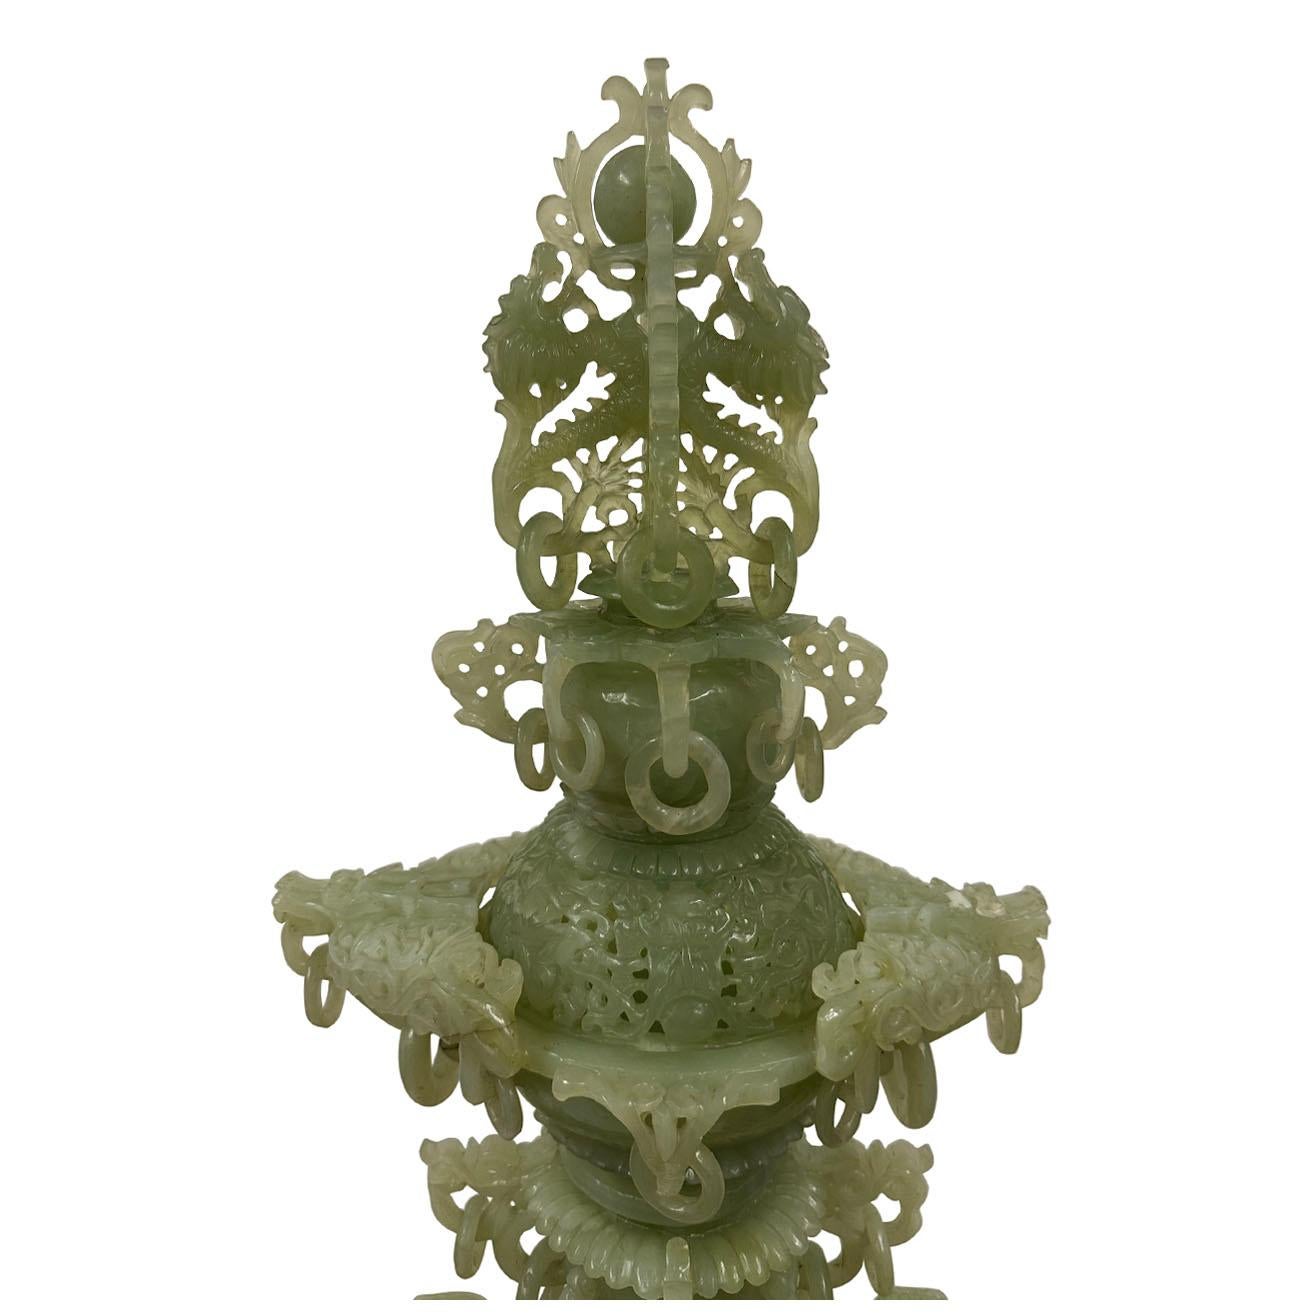 This huge Chinese Serpentine/Jade tower was Intricately and elaborately open carved dragons with a lot of free rings and chains works and details. It come with 3 parts stacked together. and can be turned at lower tier. There are 12 carved dragons on